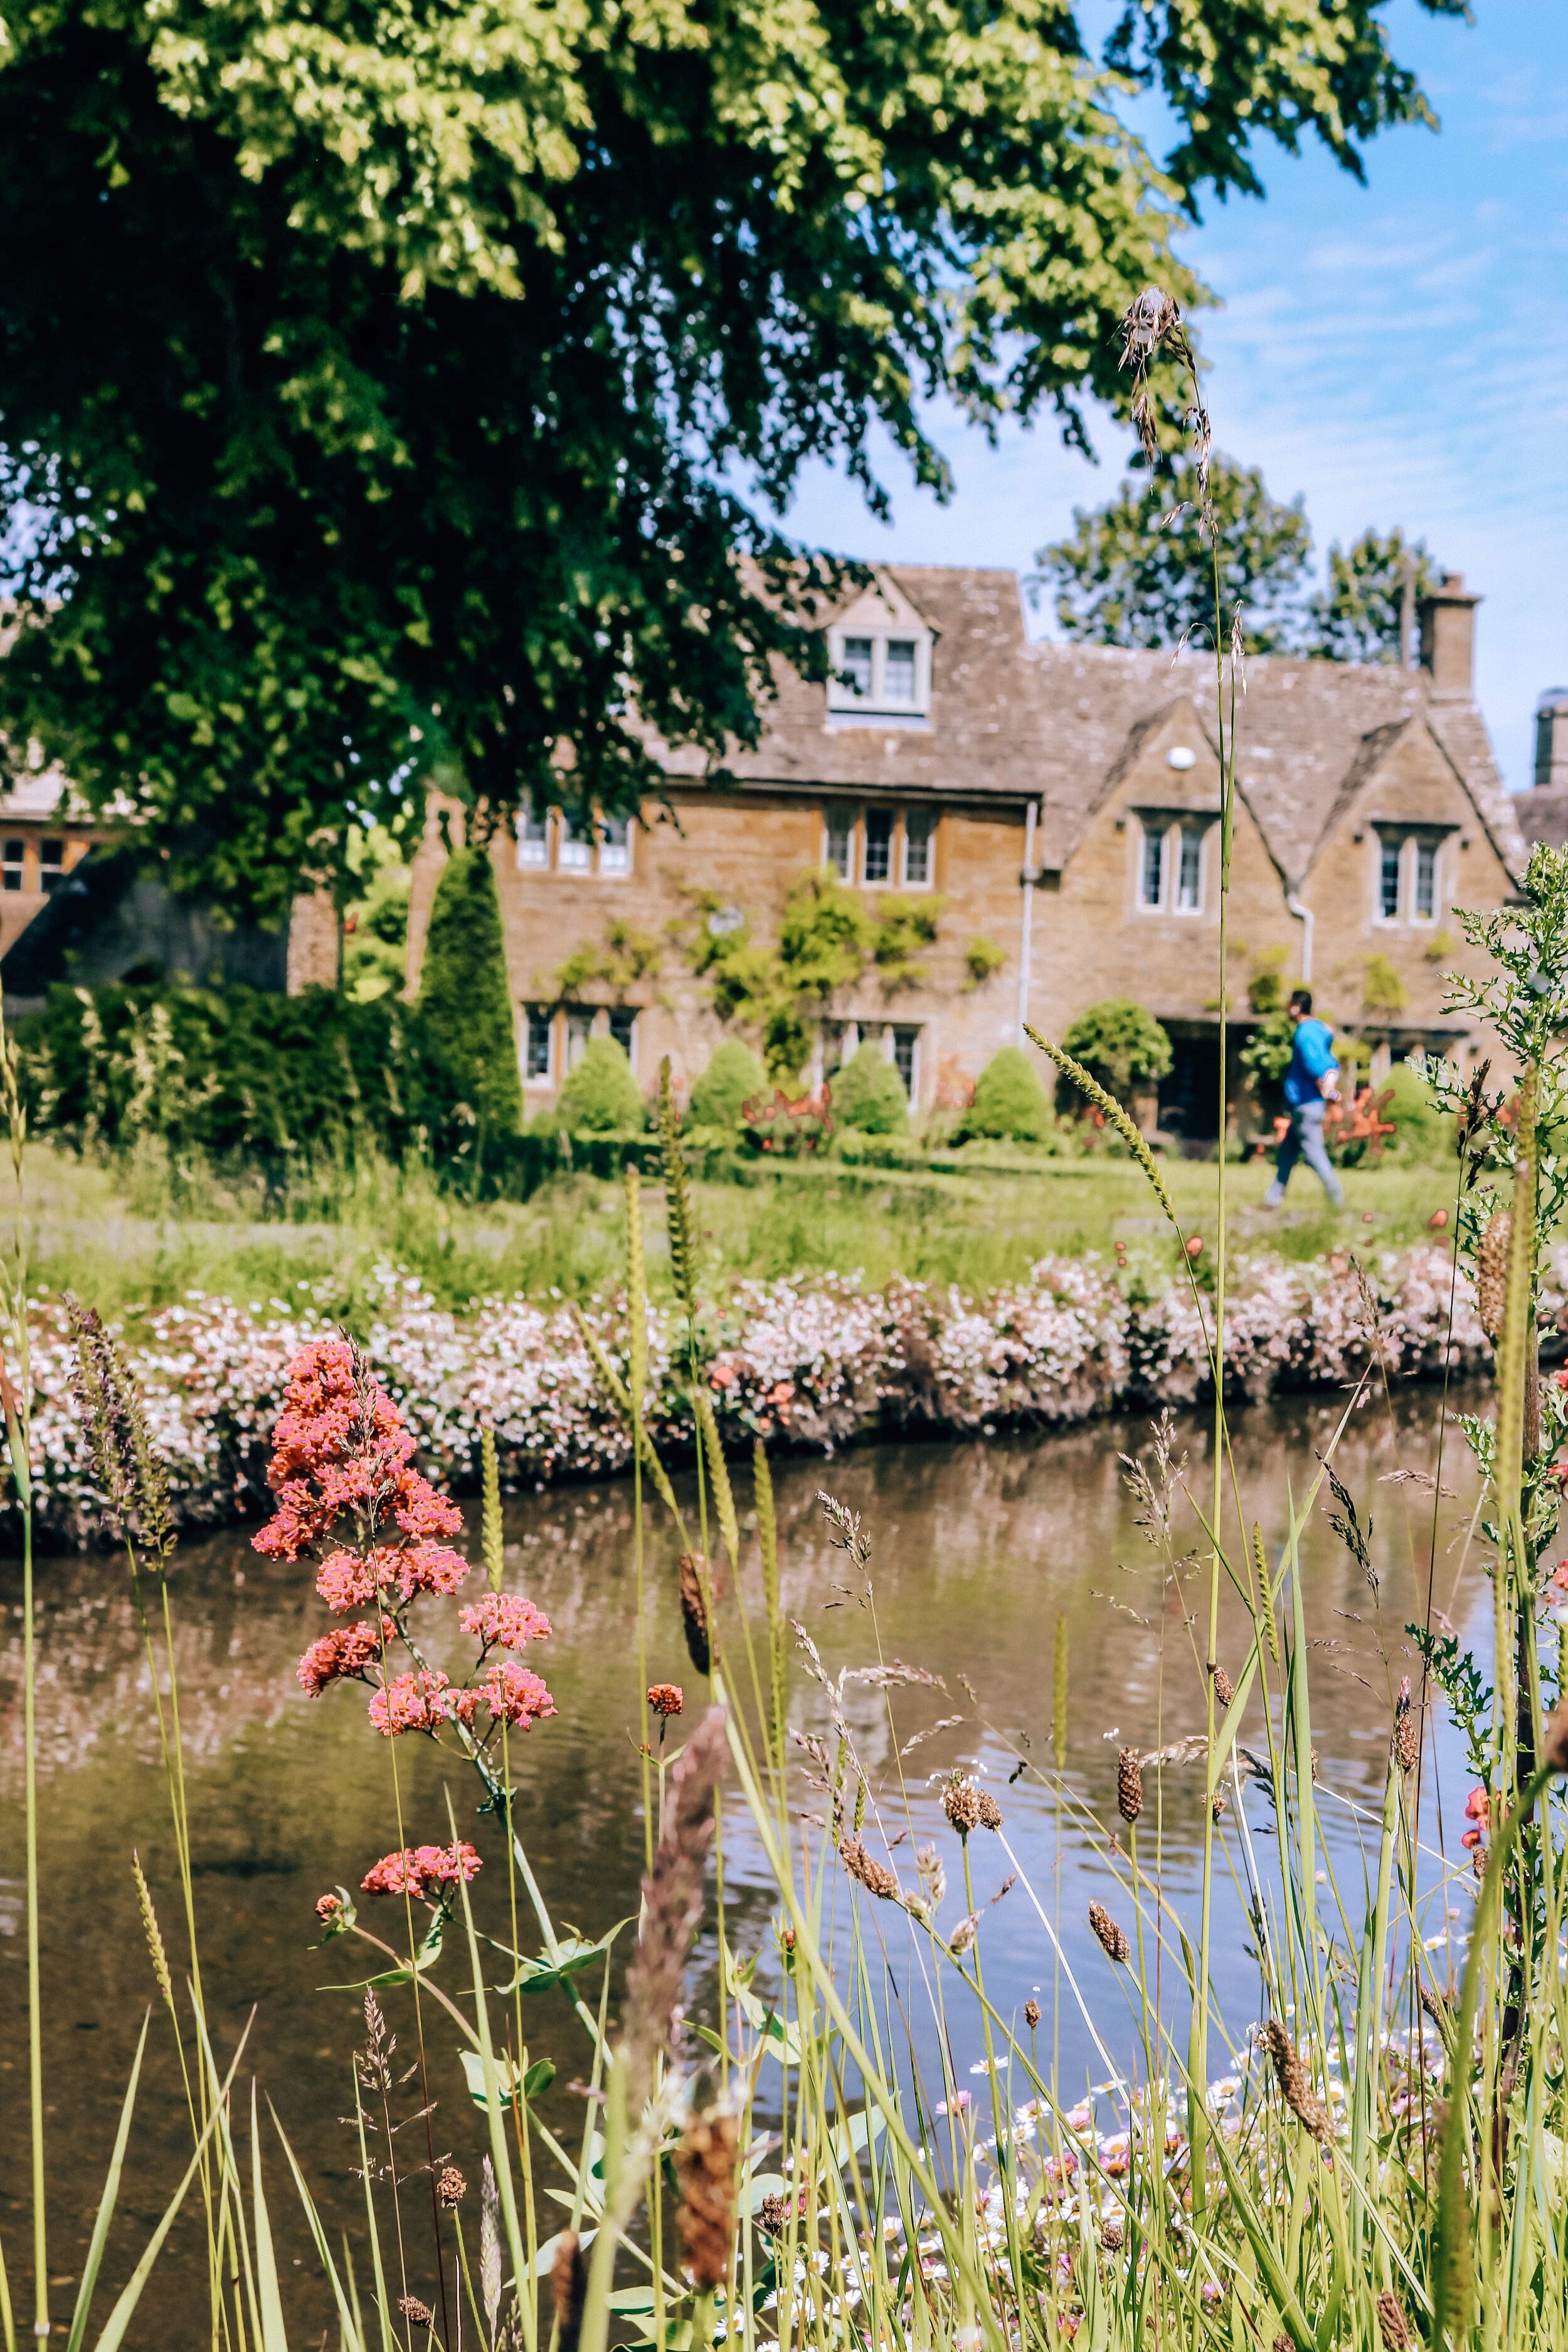 Lower Slaughter, Cotswolds